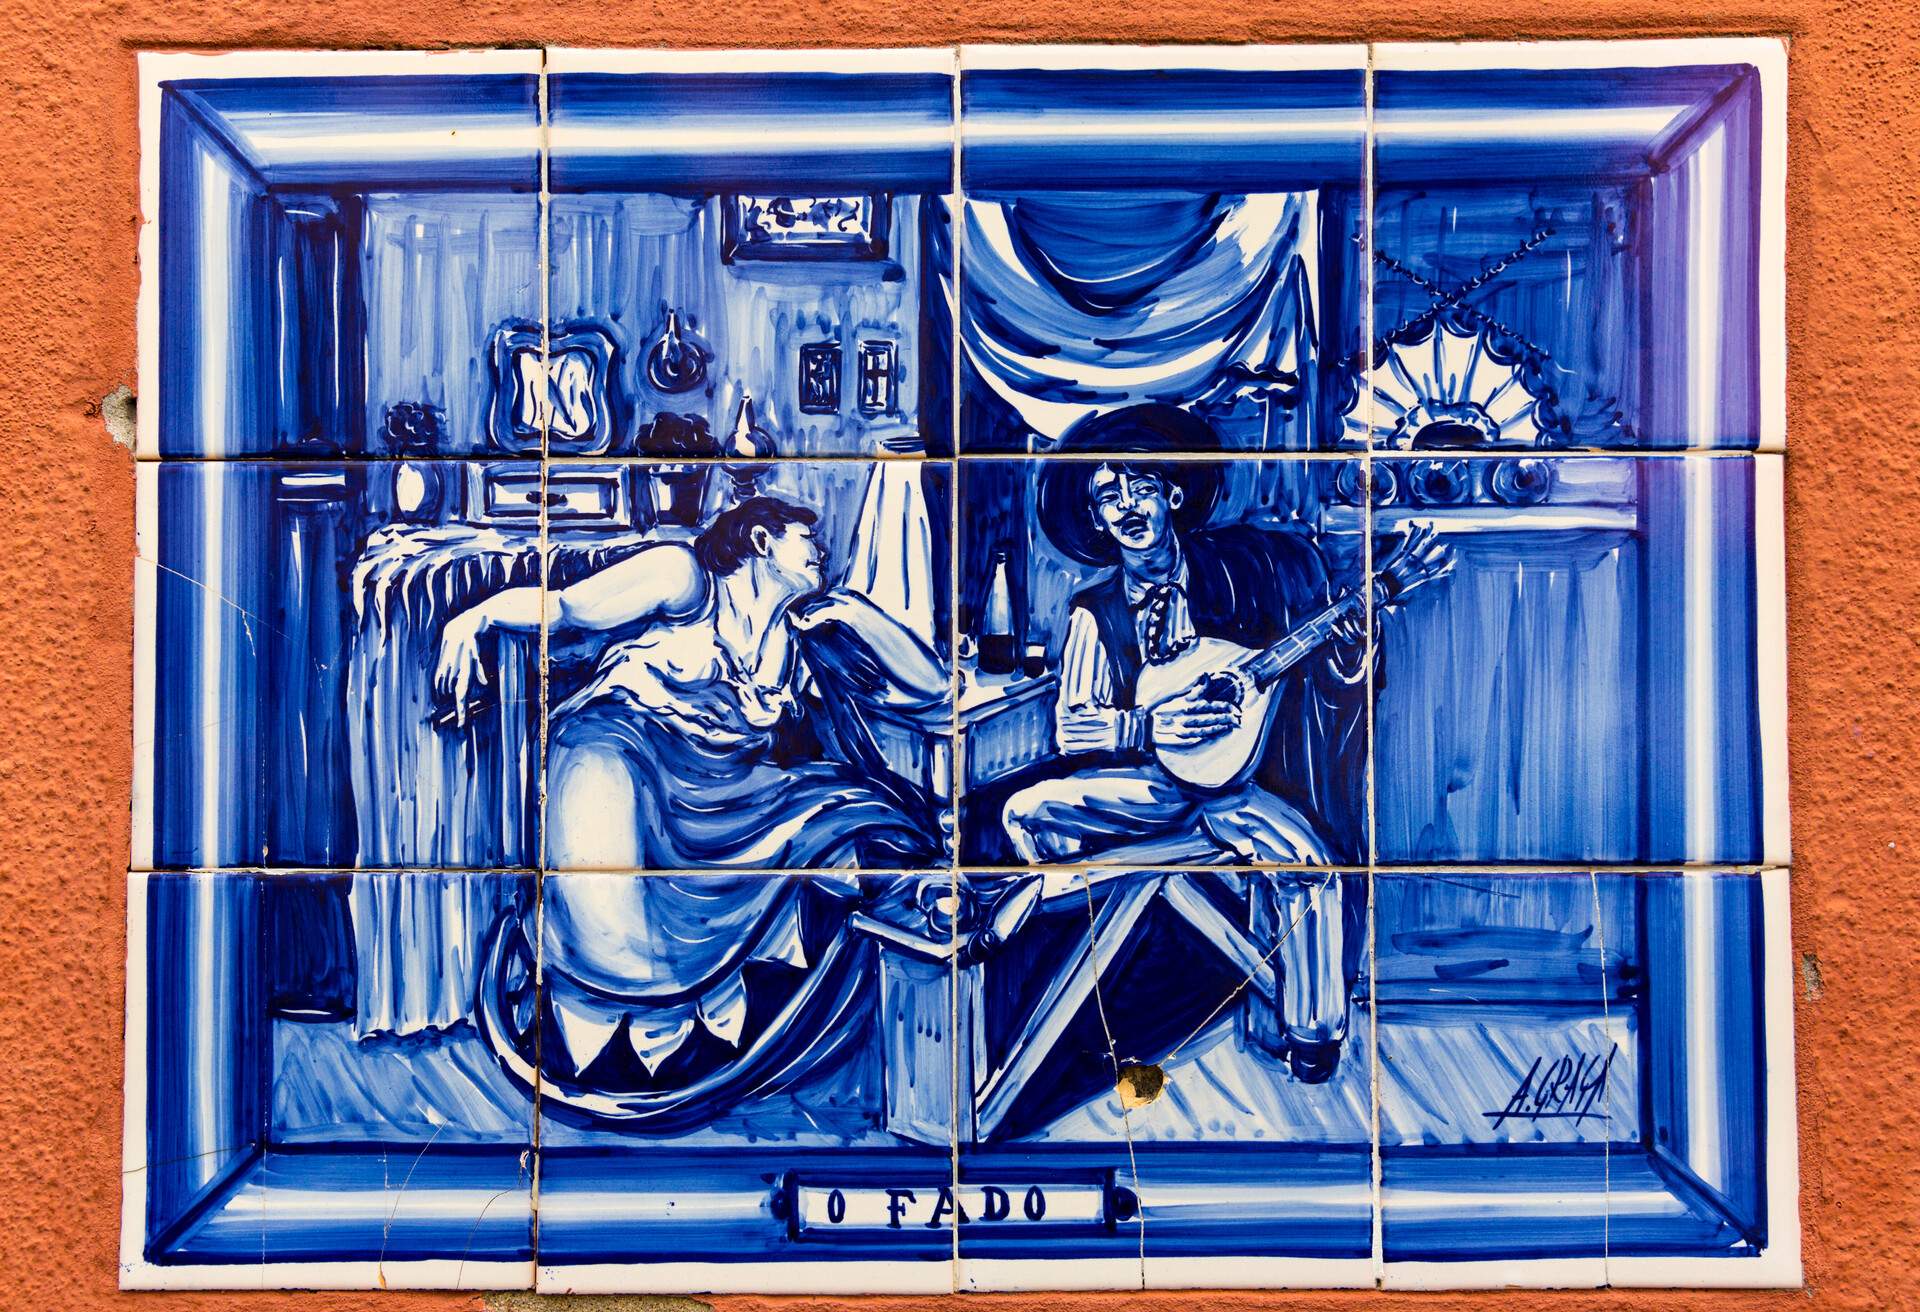 An exterior wall with a fado artwork made of blue and white ceramic tiles.